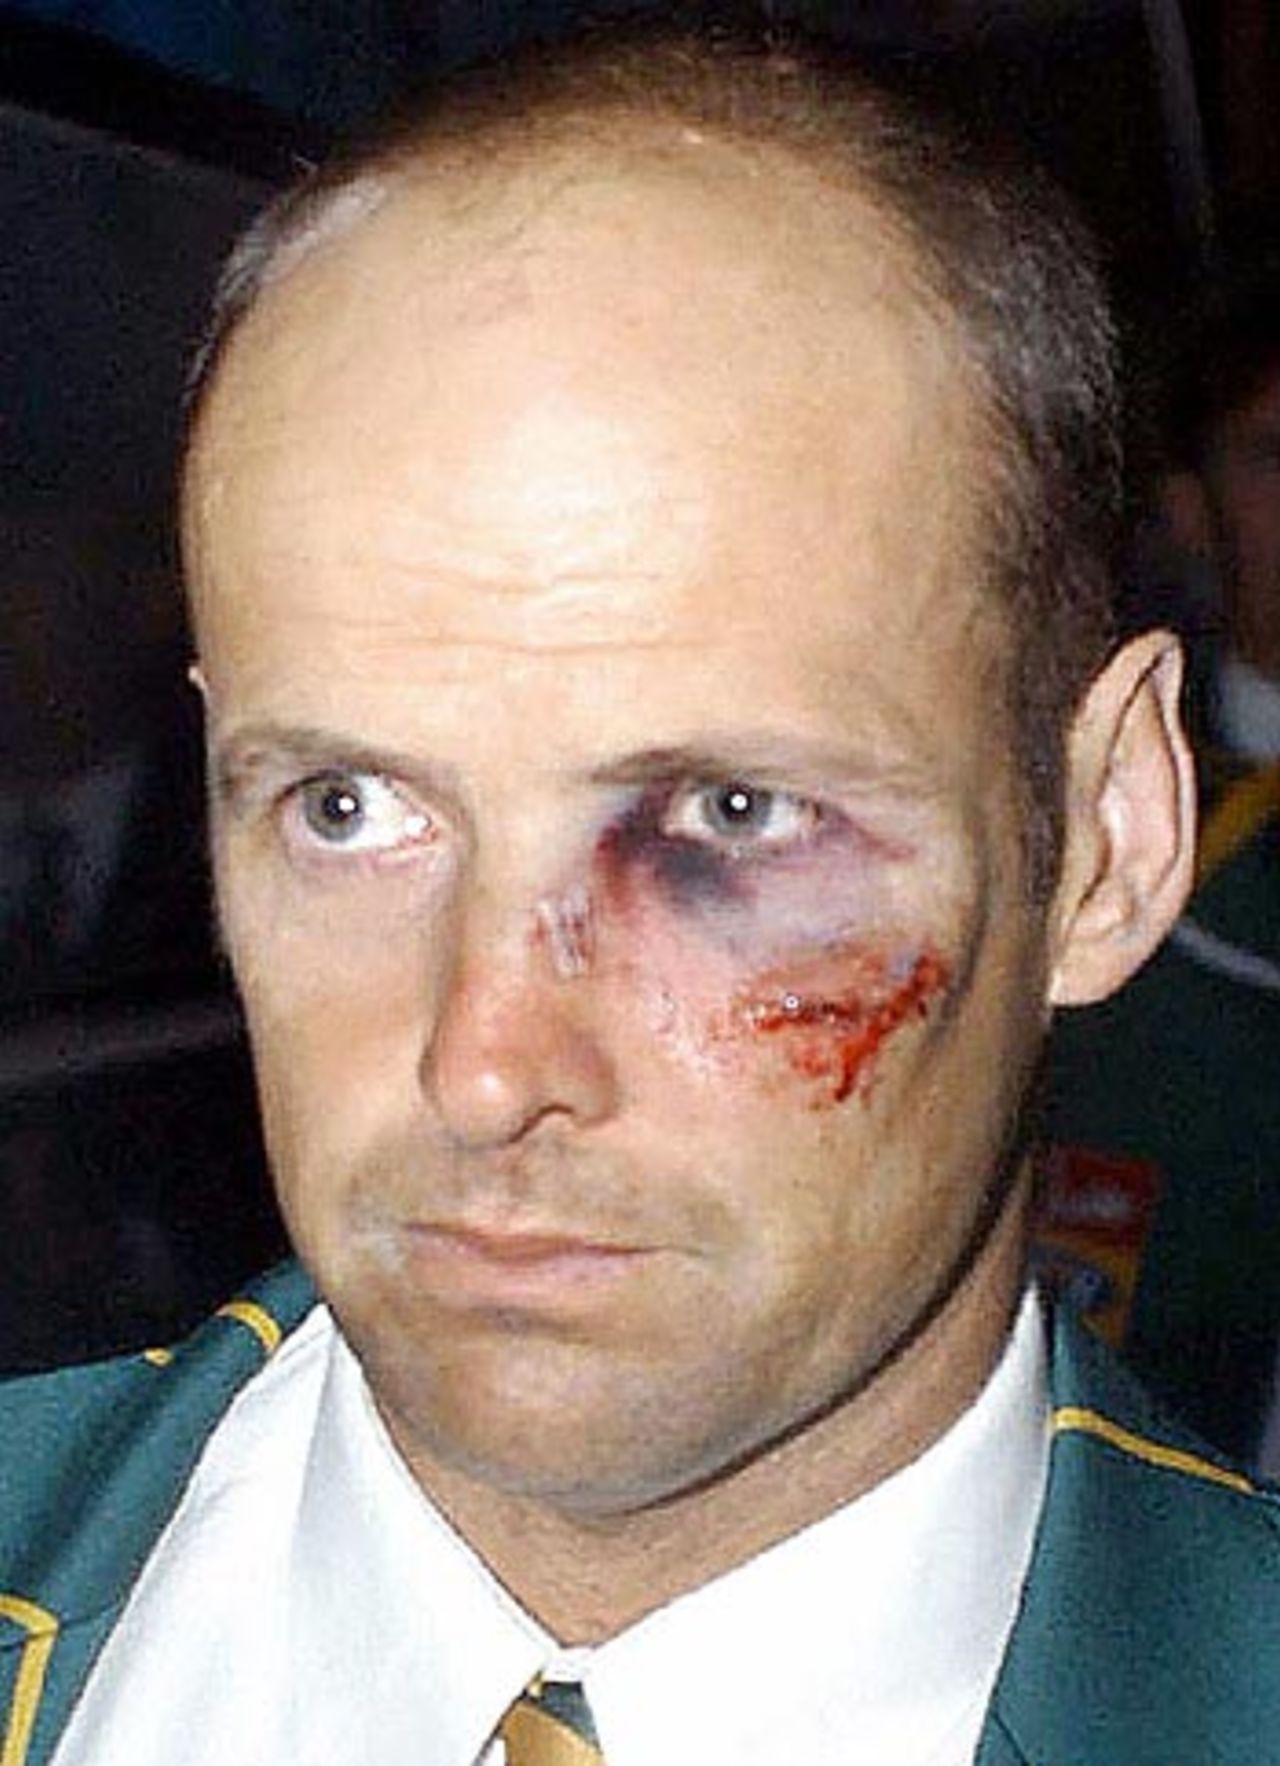 Gary Kirsten shows the effects of being hit by Shoaib Akhtar. He had ten stitches and suffered a broken nose and eye socket, Pakistan v South Africa, Lahore, October 17, 2003